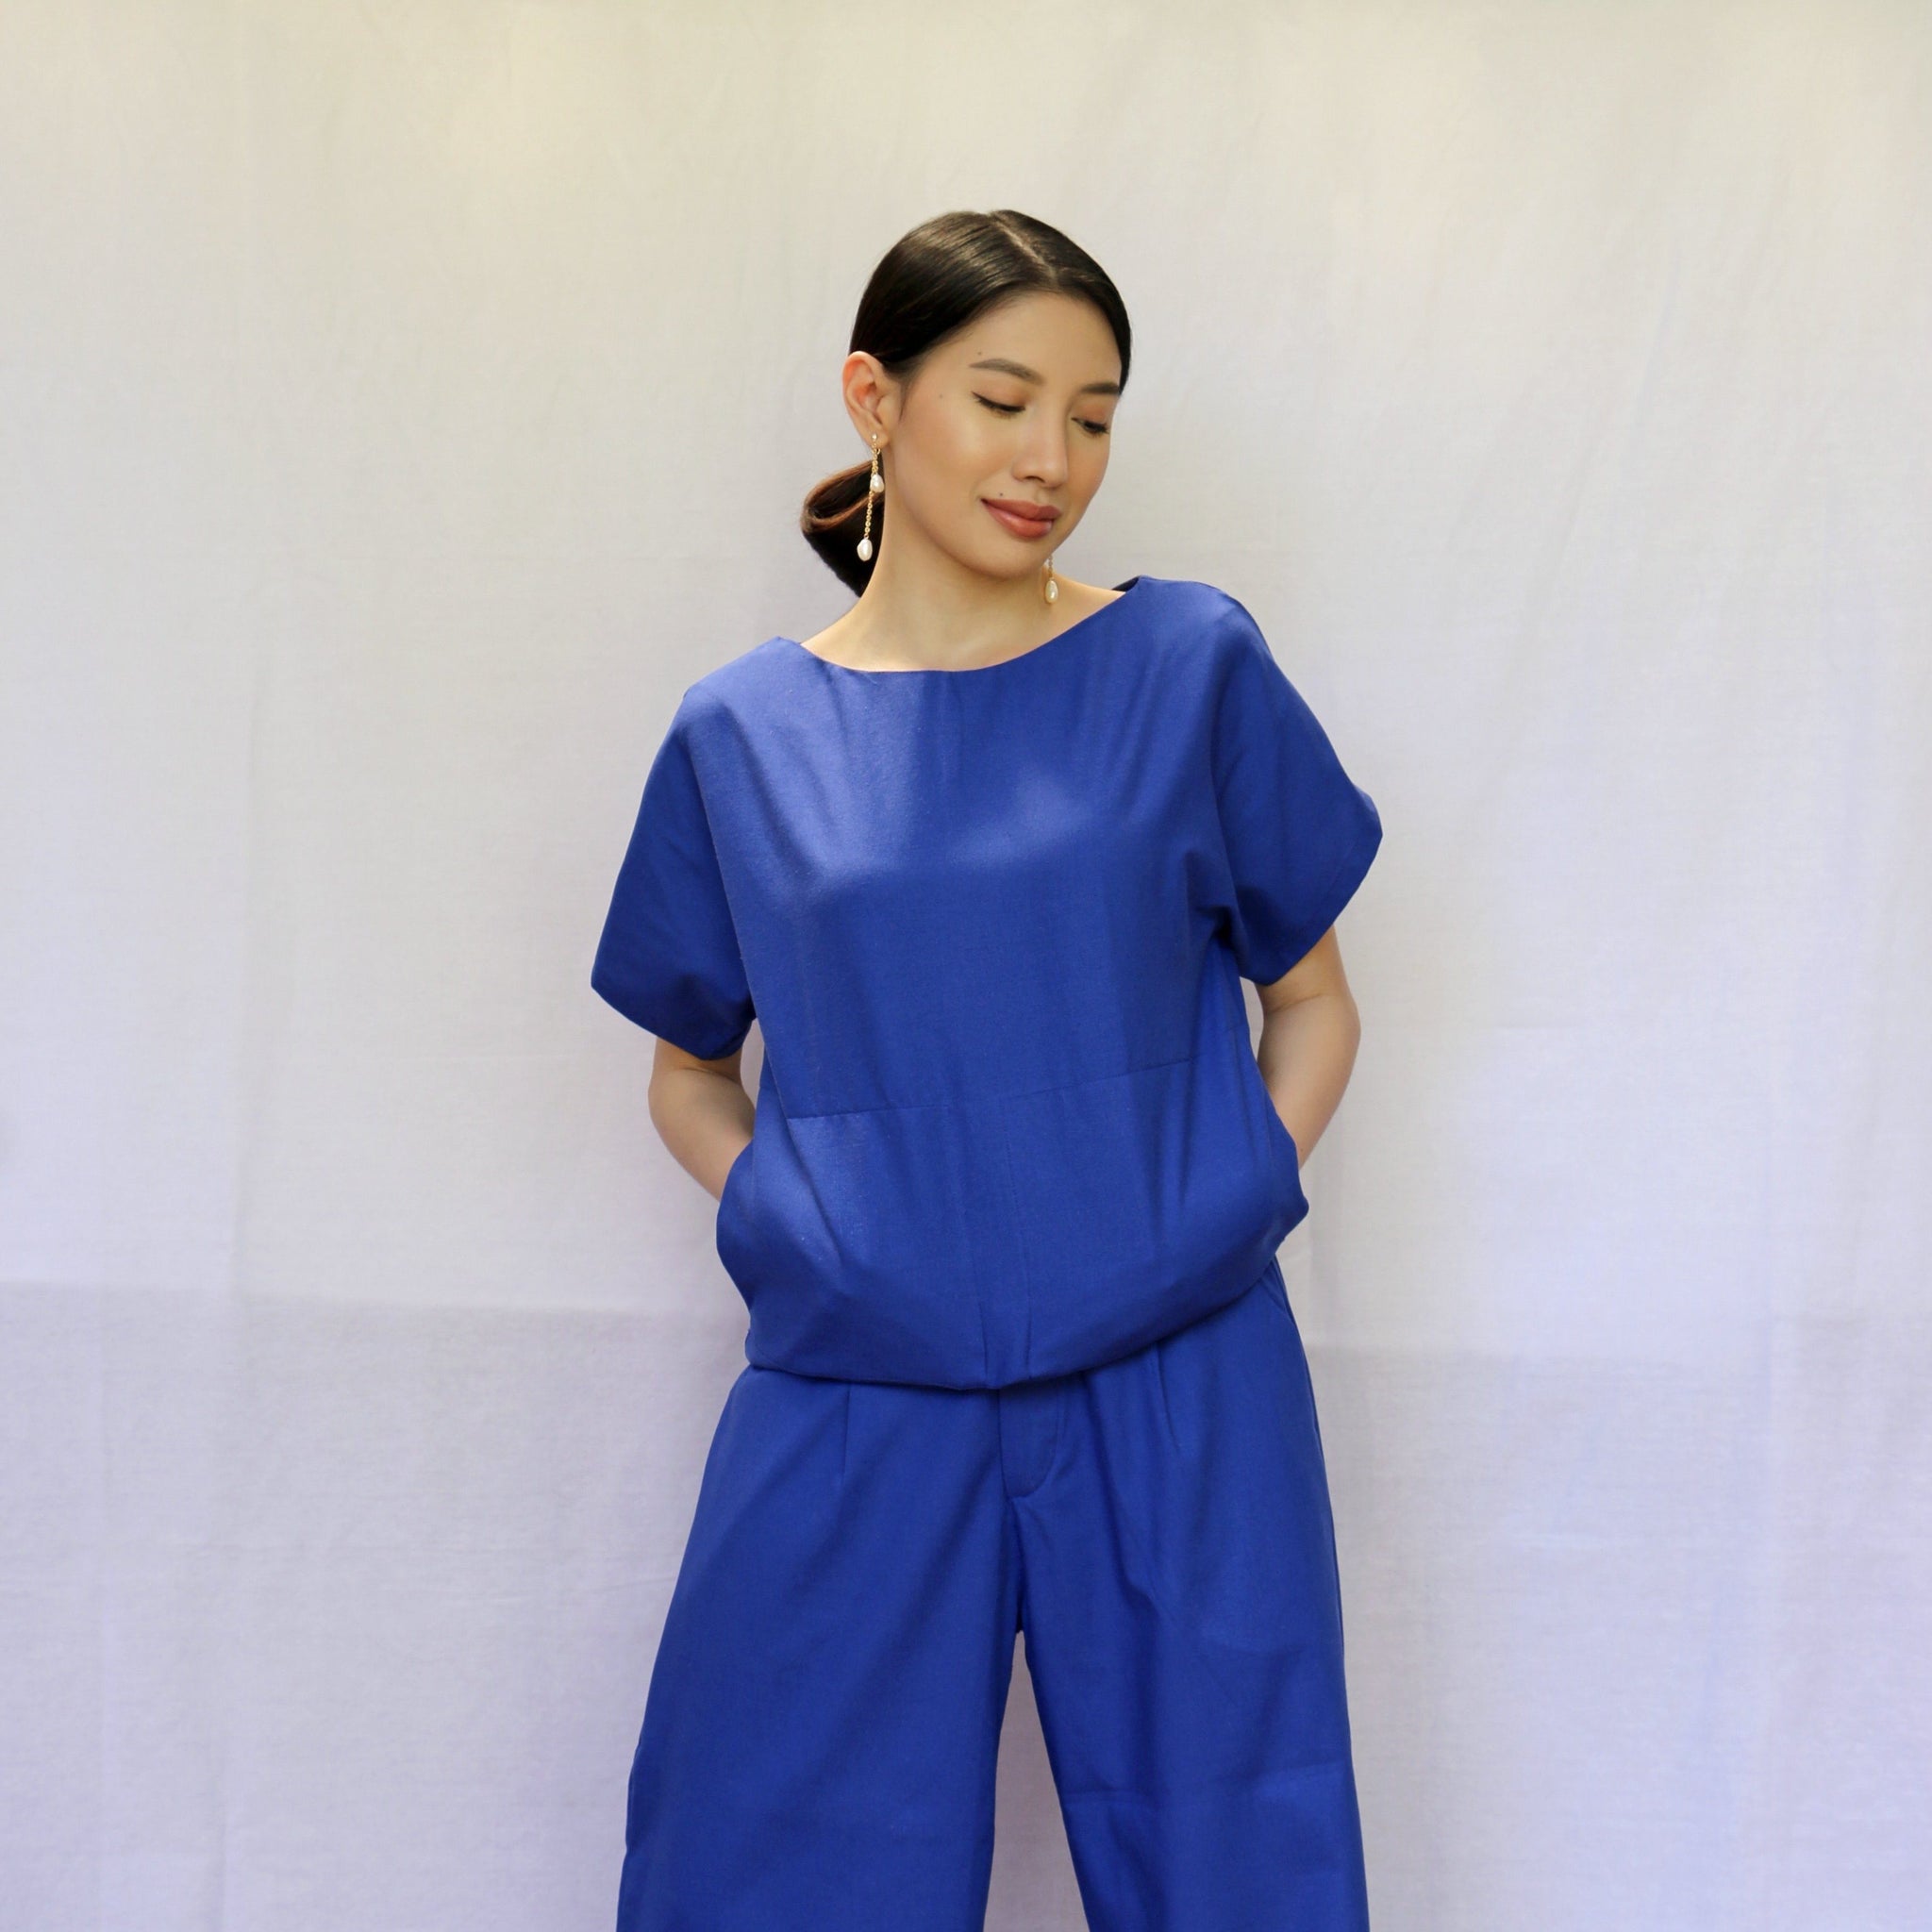 The Easy Top Royal Blue Fashion Rags2Riches